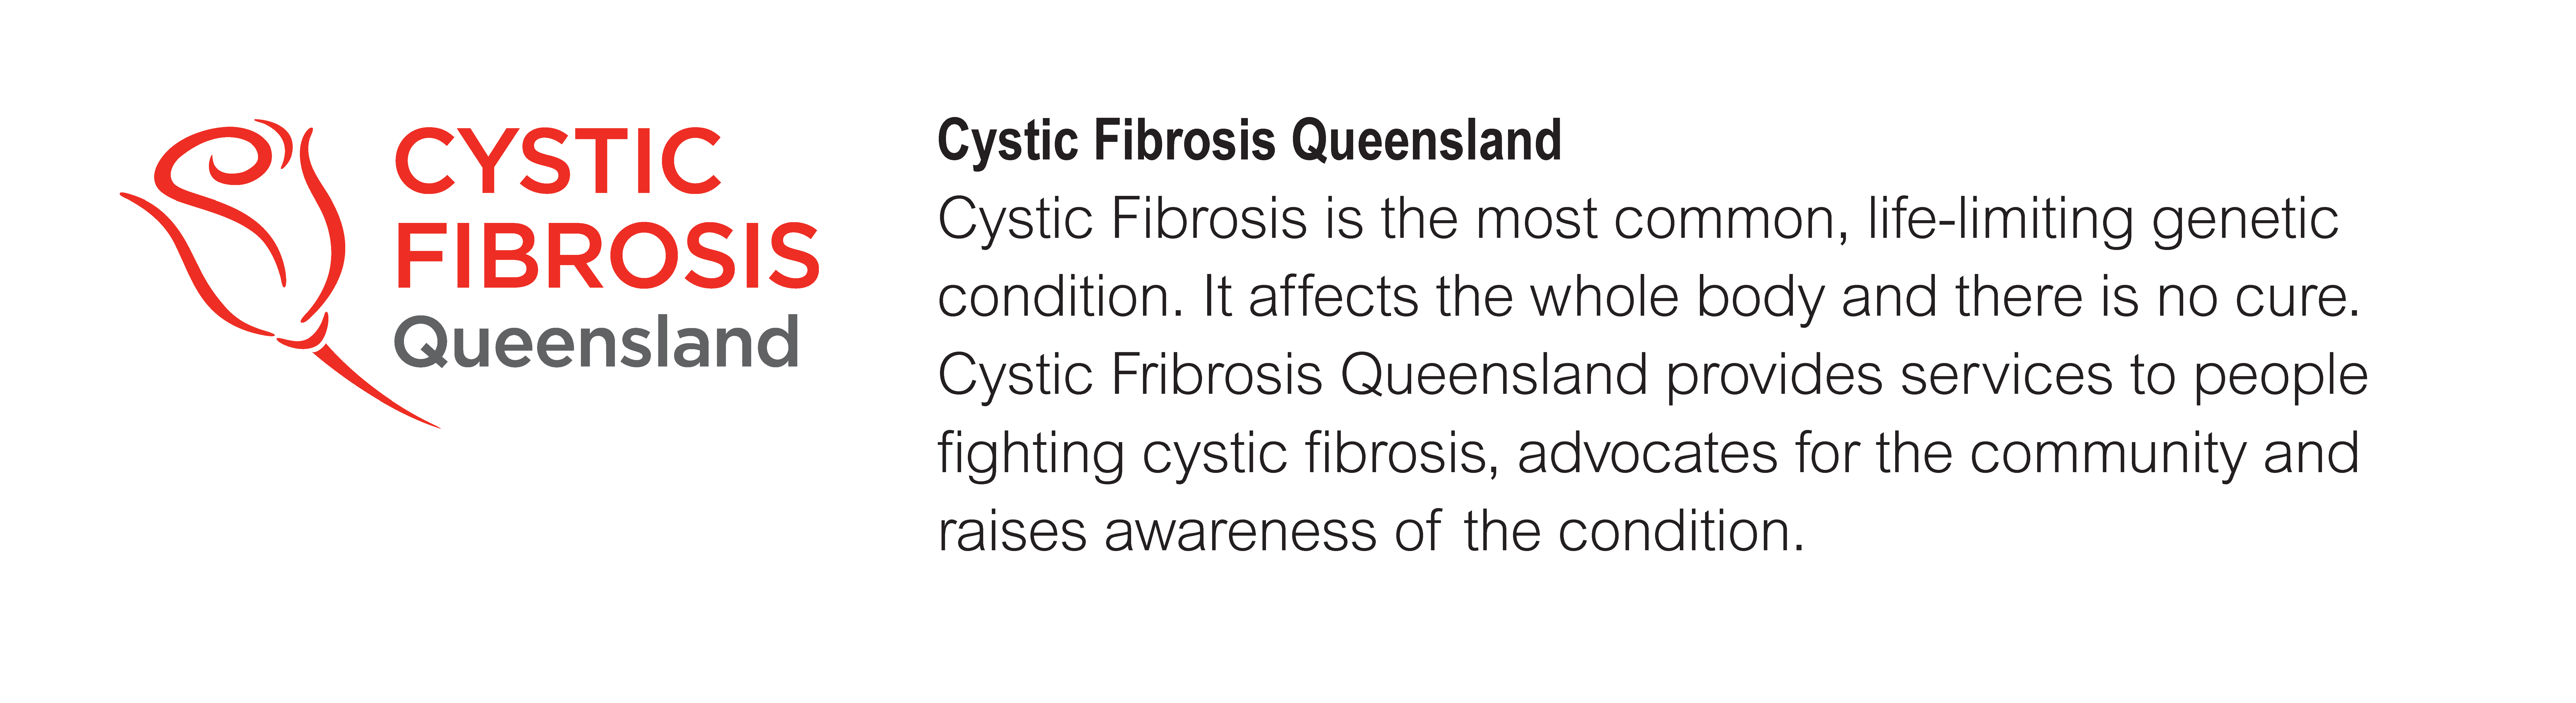 Charity_Cystic Fibrosis QLD_colour